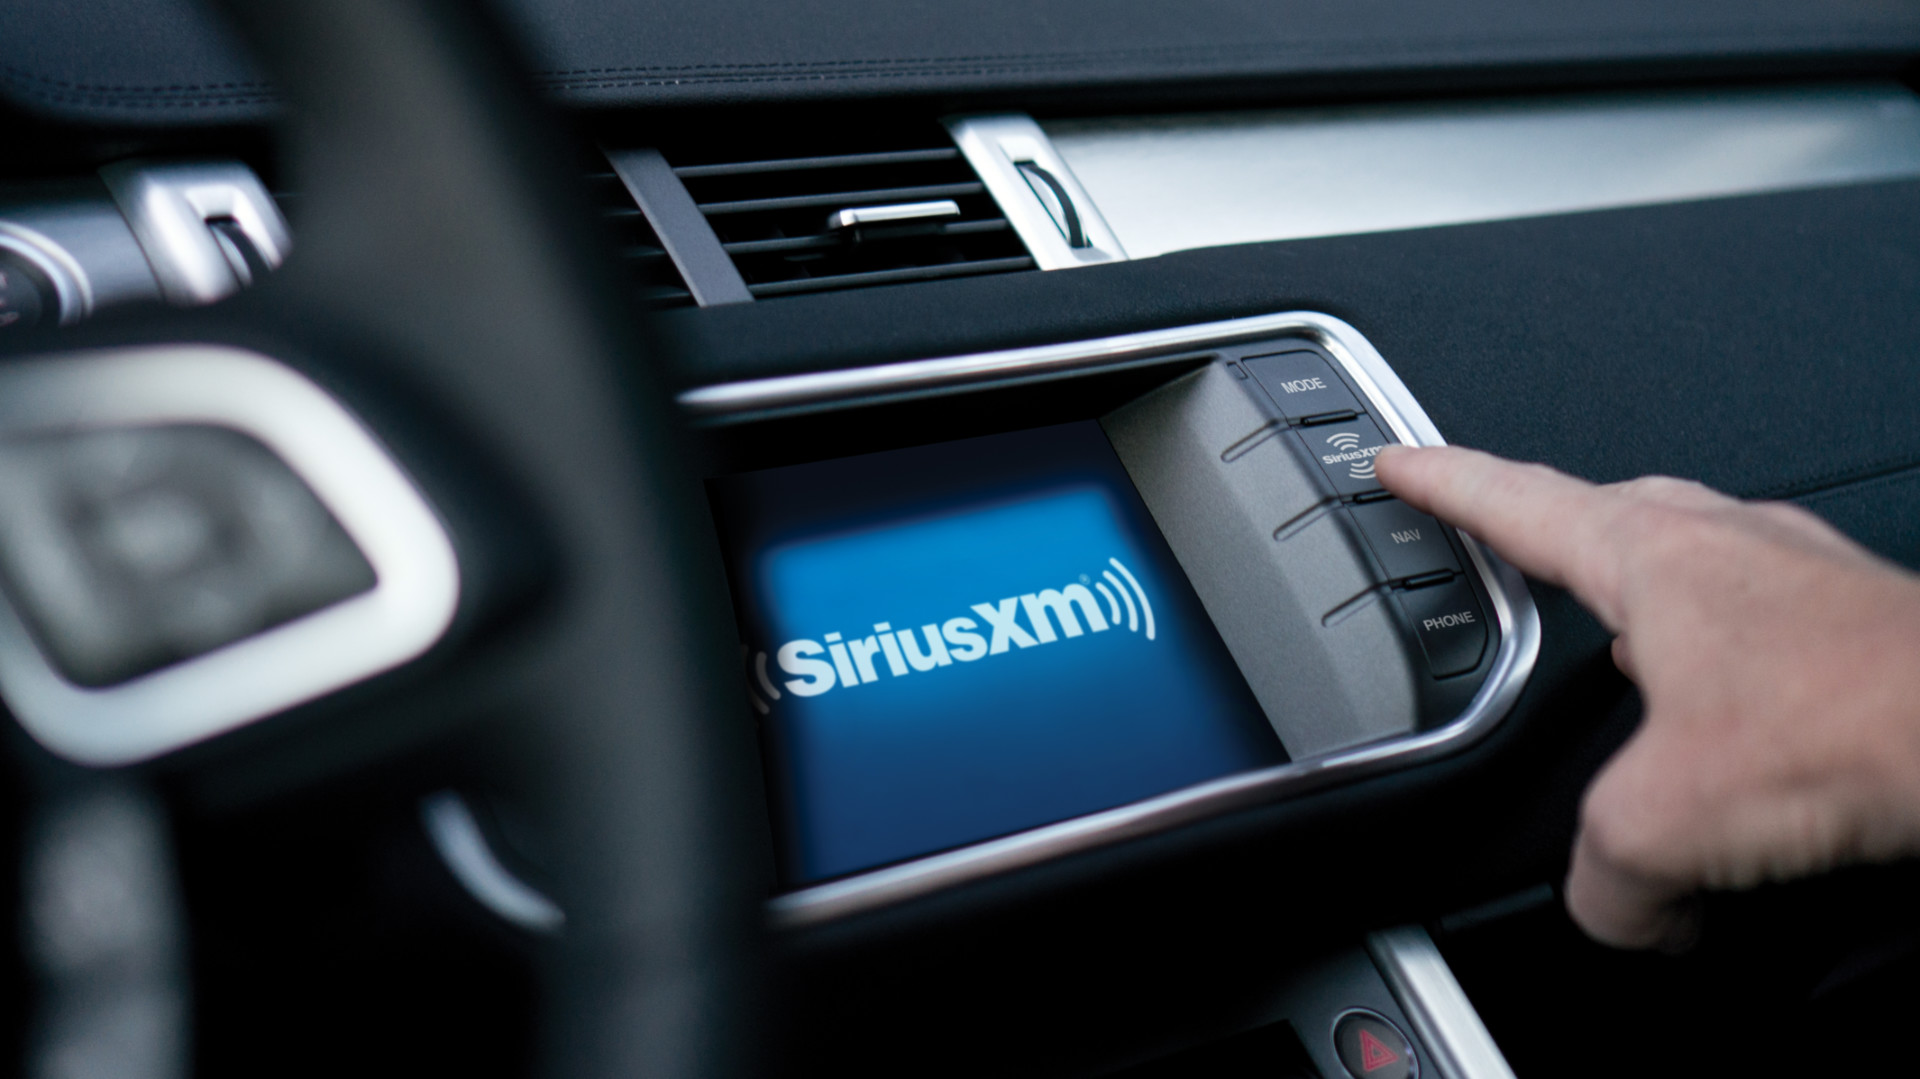 SiriusXM is buying Stitcher to expand into the rapidly growing podcasting industry